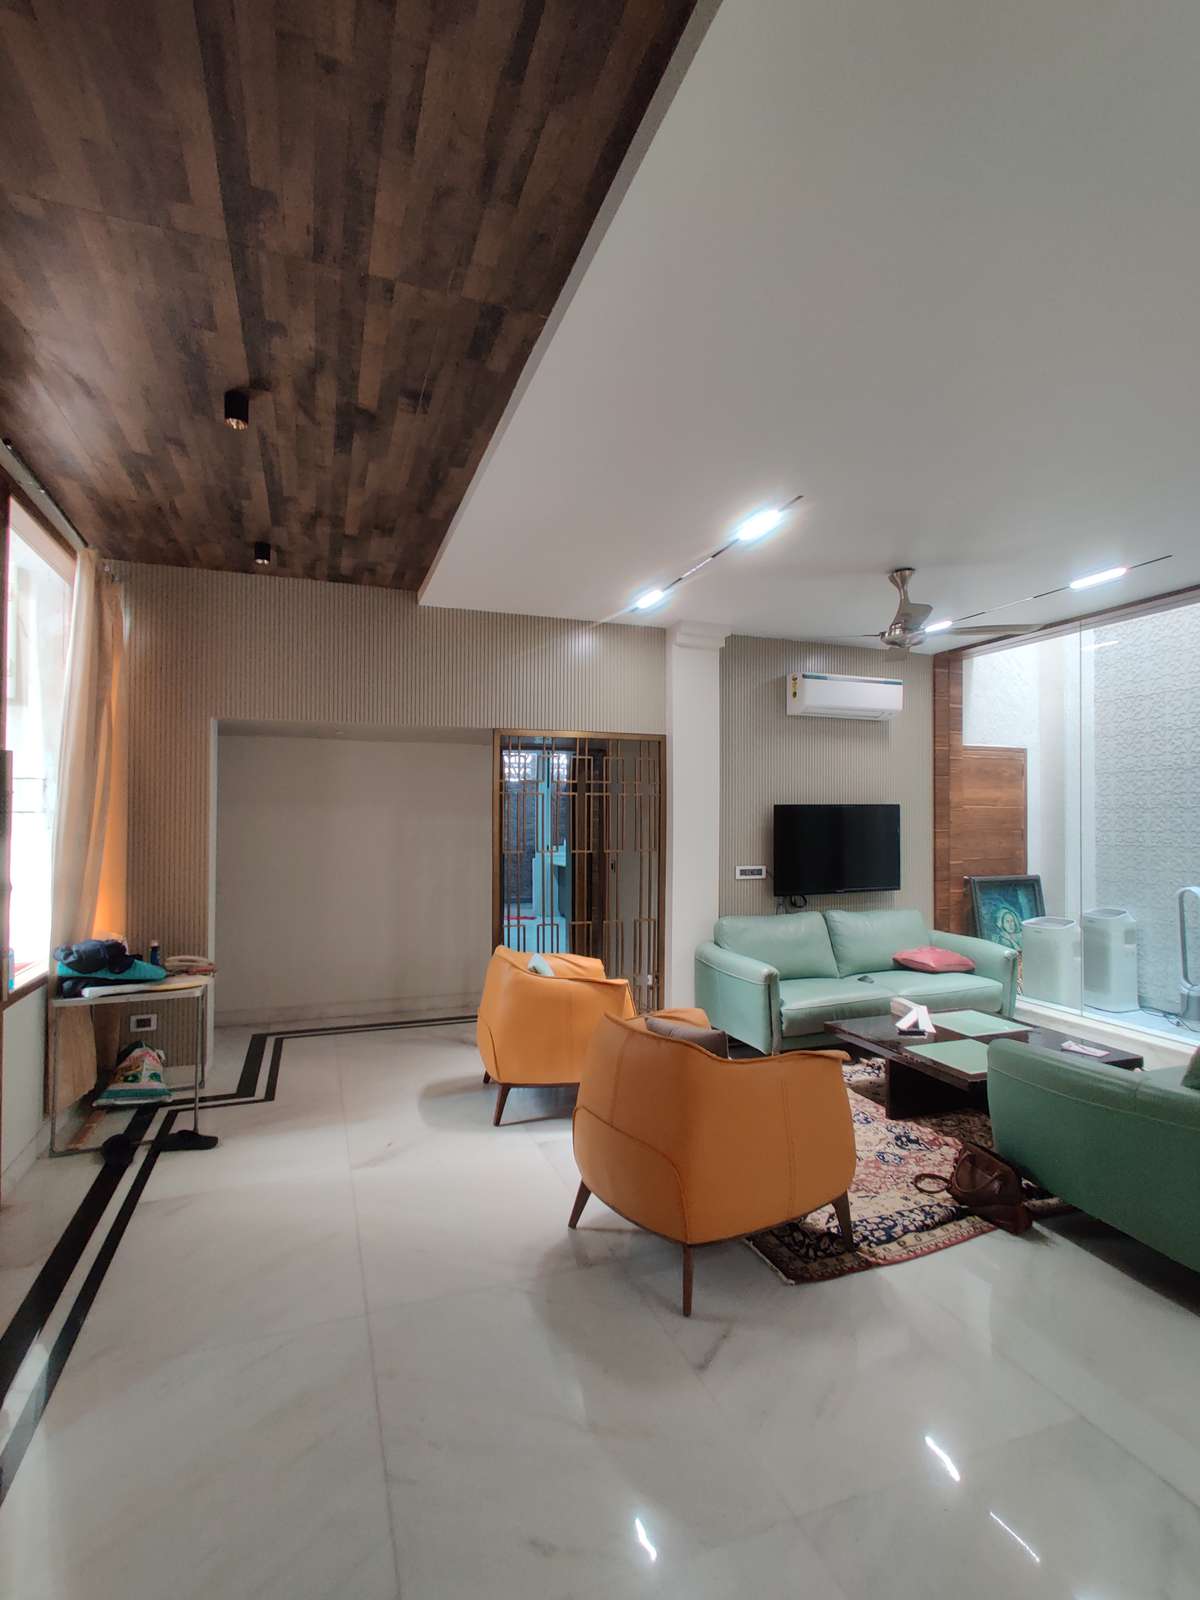 Recently completed total interior renovation of a G+1 villa at Punjabi Bagh in a very minimalistic tone and light colours. Dramatic lights and ceiling elements add to the charm of the whole space.
#InteriorDesigner #Residencedesign #residenceinterior #Minimalistic #greys #architecturedesigns #Architect #Architectural&Interior #CelingLights #Simplestyle